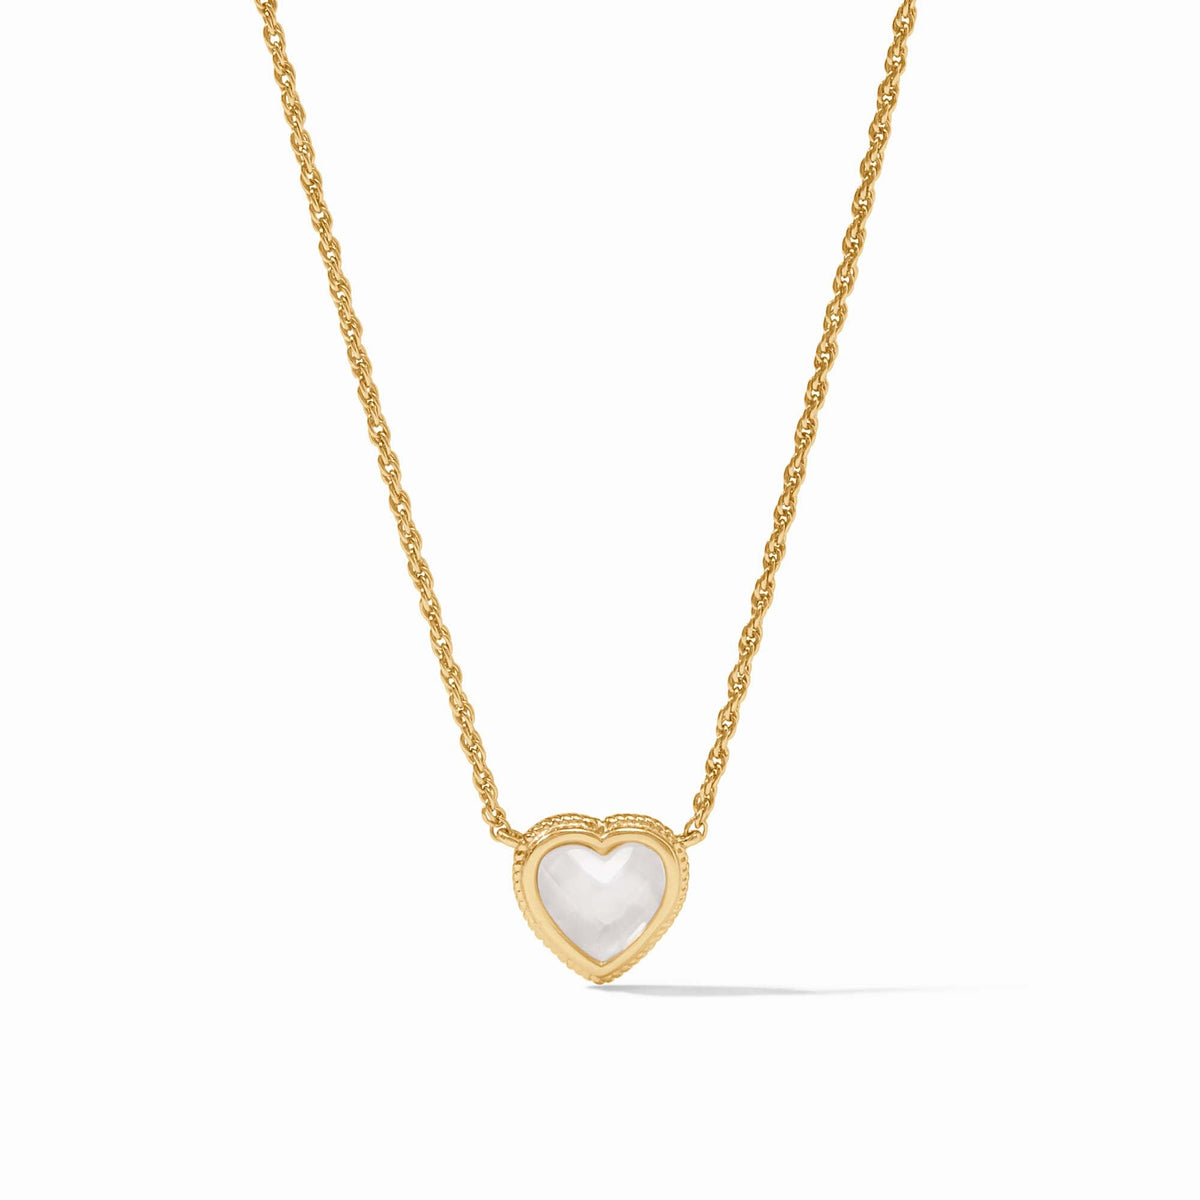 Julie Vos - Heart Delicate Necklace, Iridescent Clear Crystal